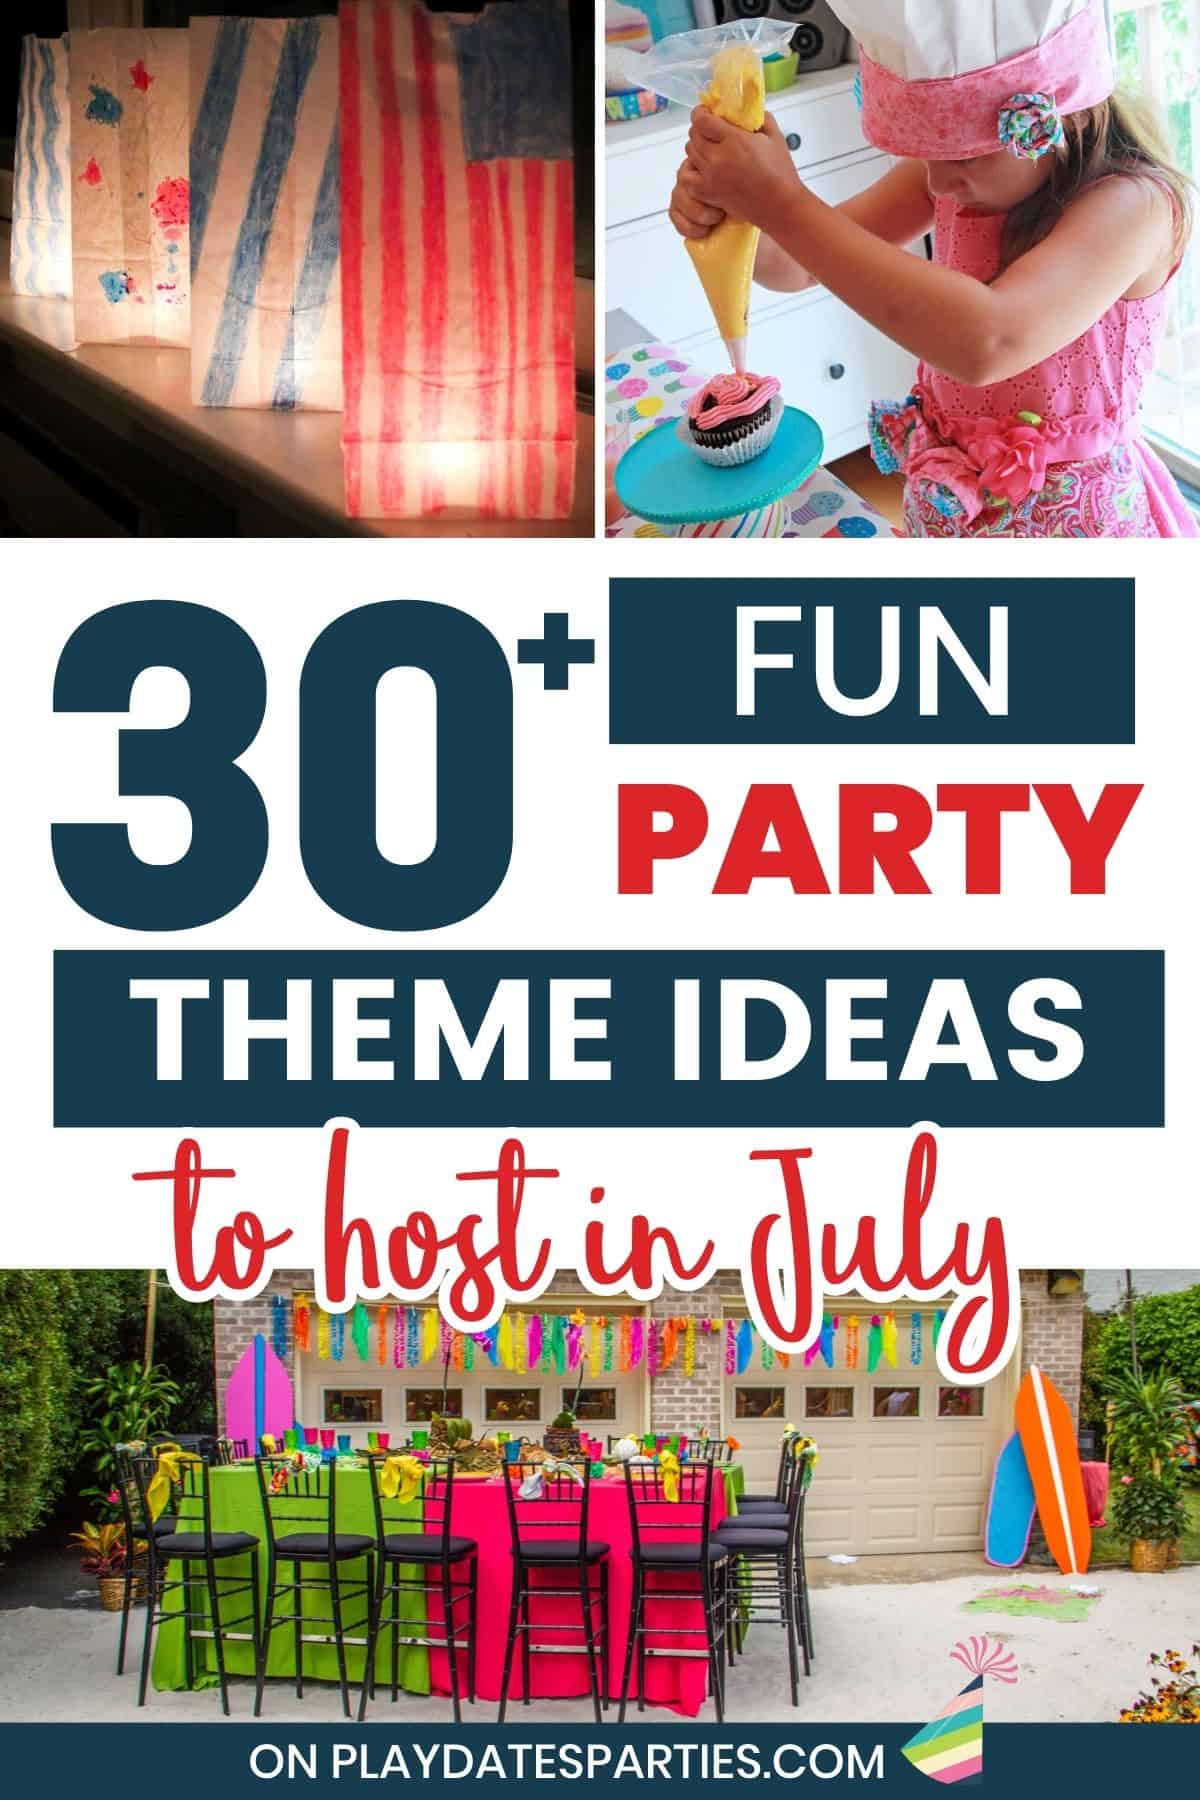 30 plus fun party theme ideas to host in July.